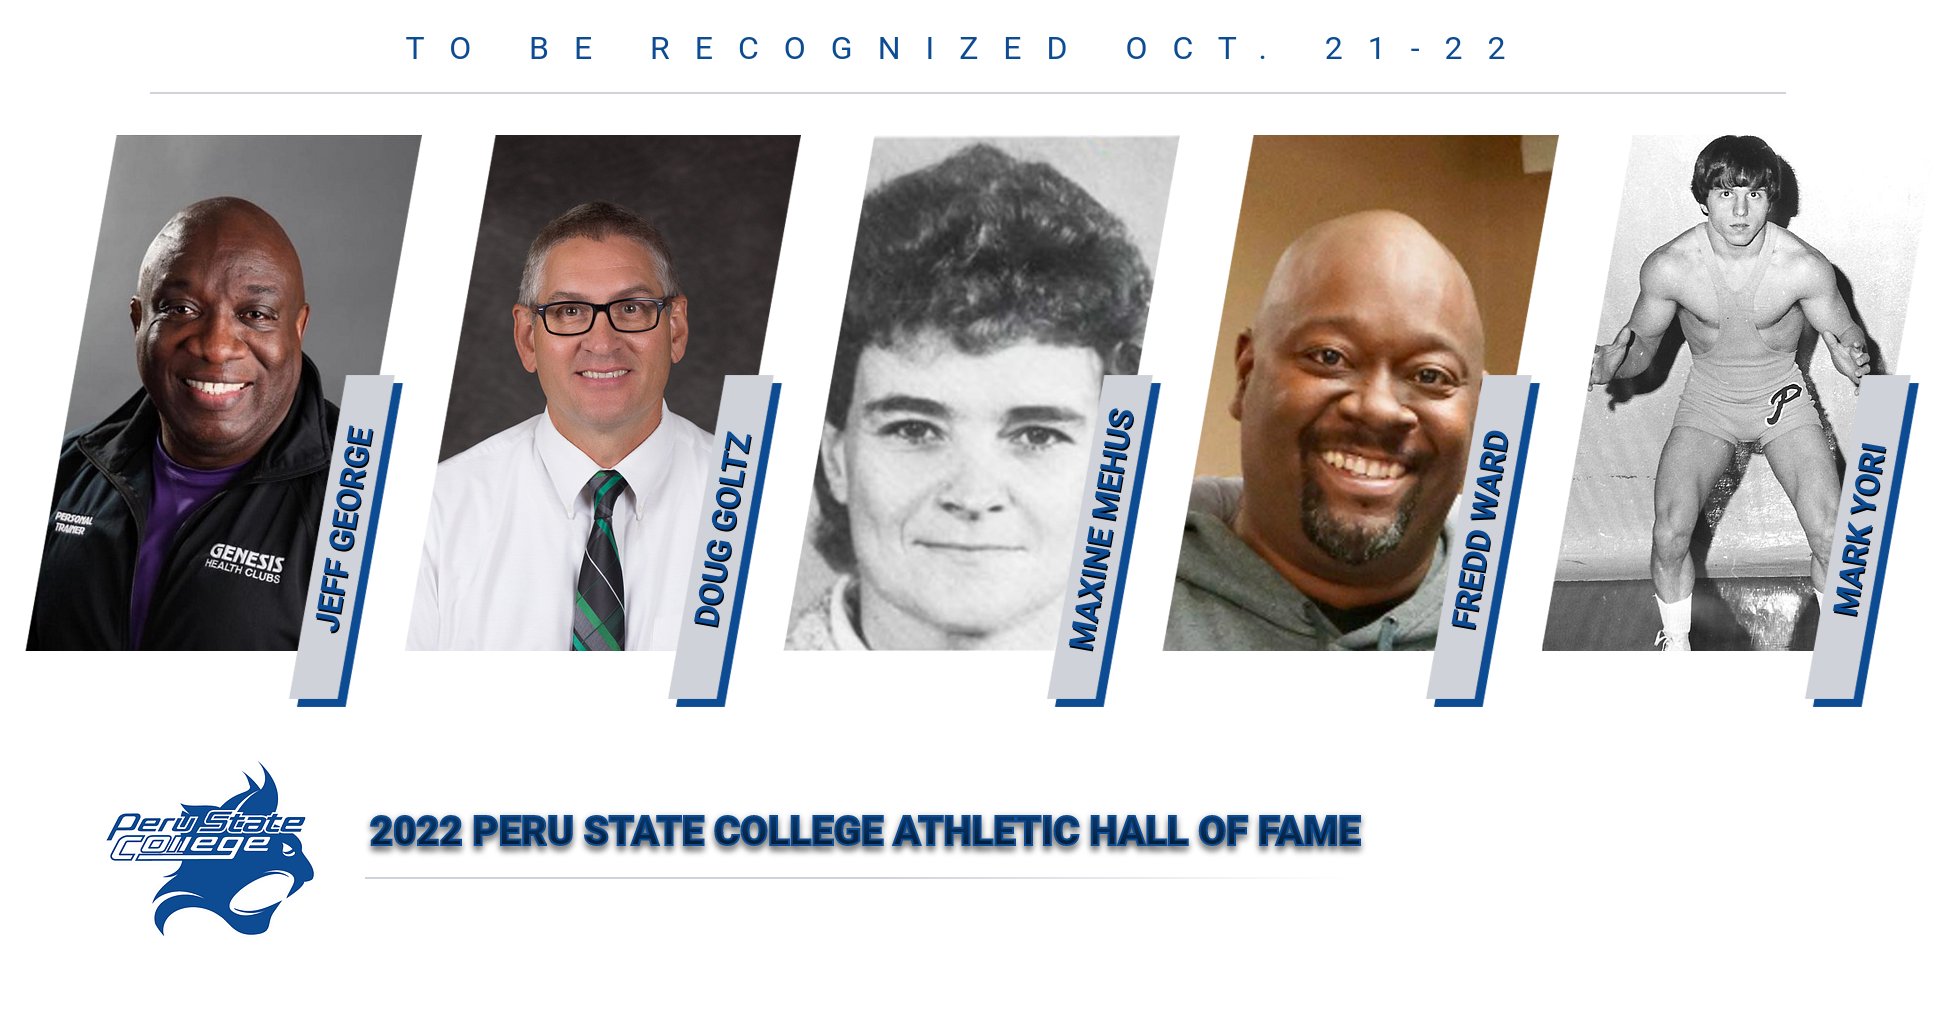 Peru State College Athletic Hall of Fame 2022 Inductees